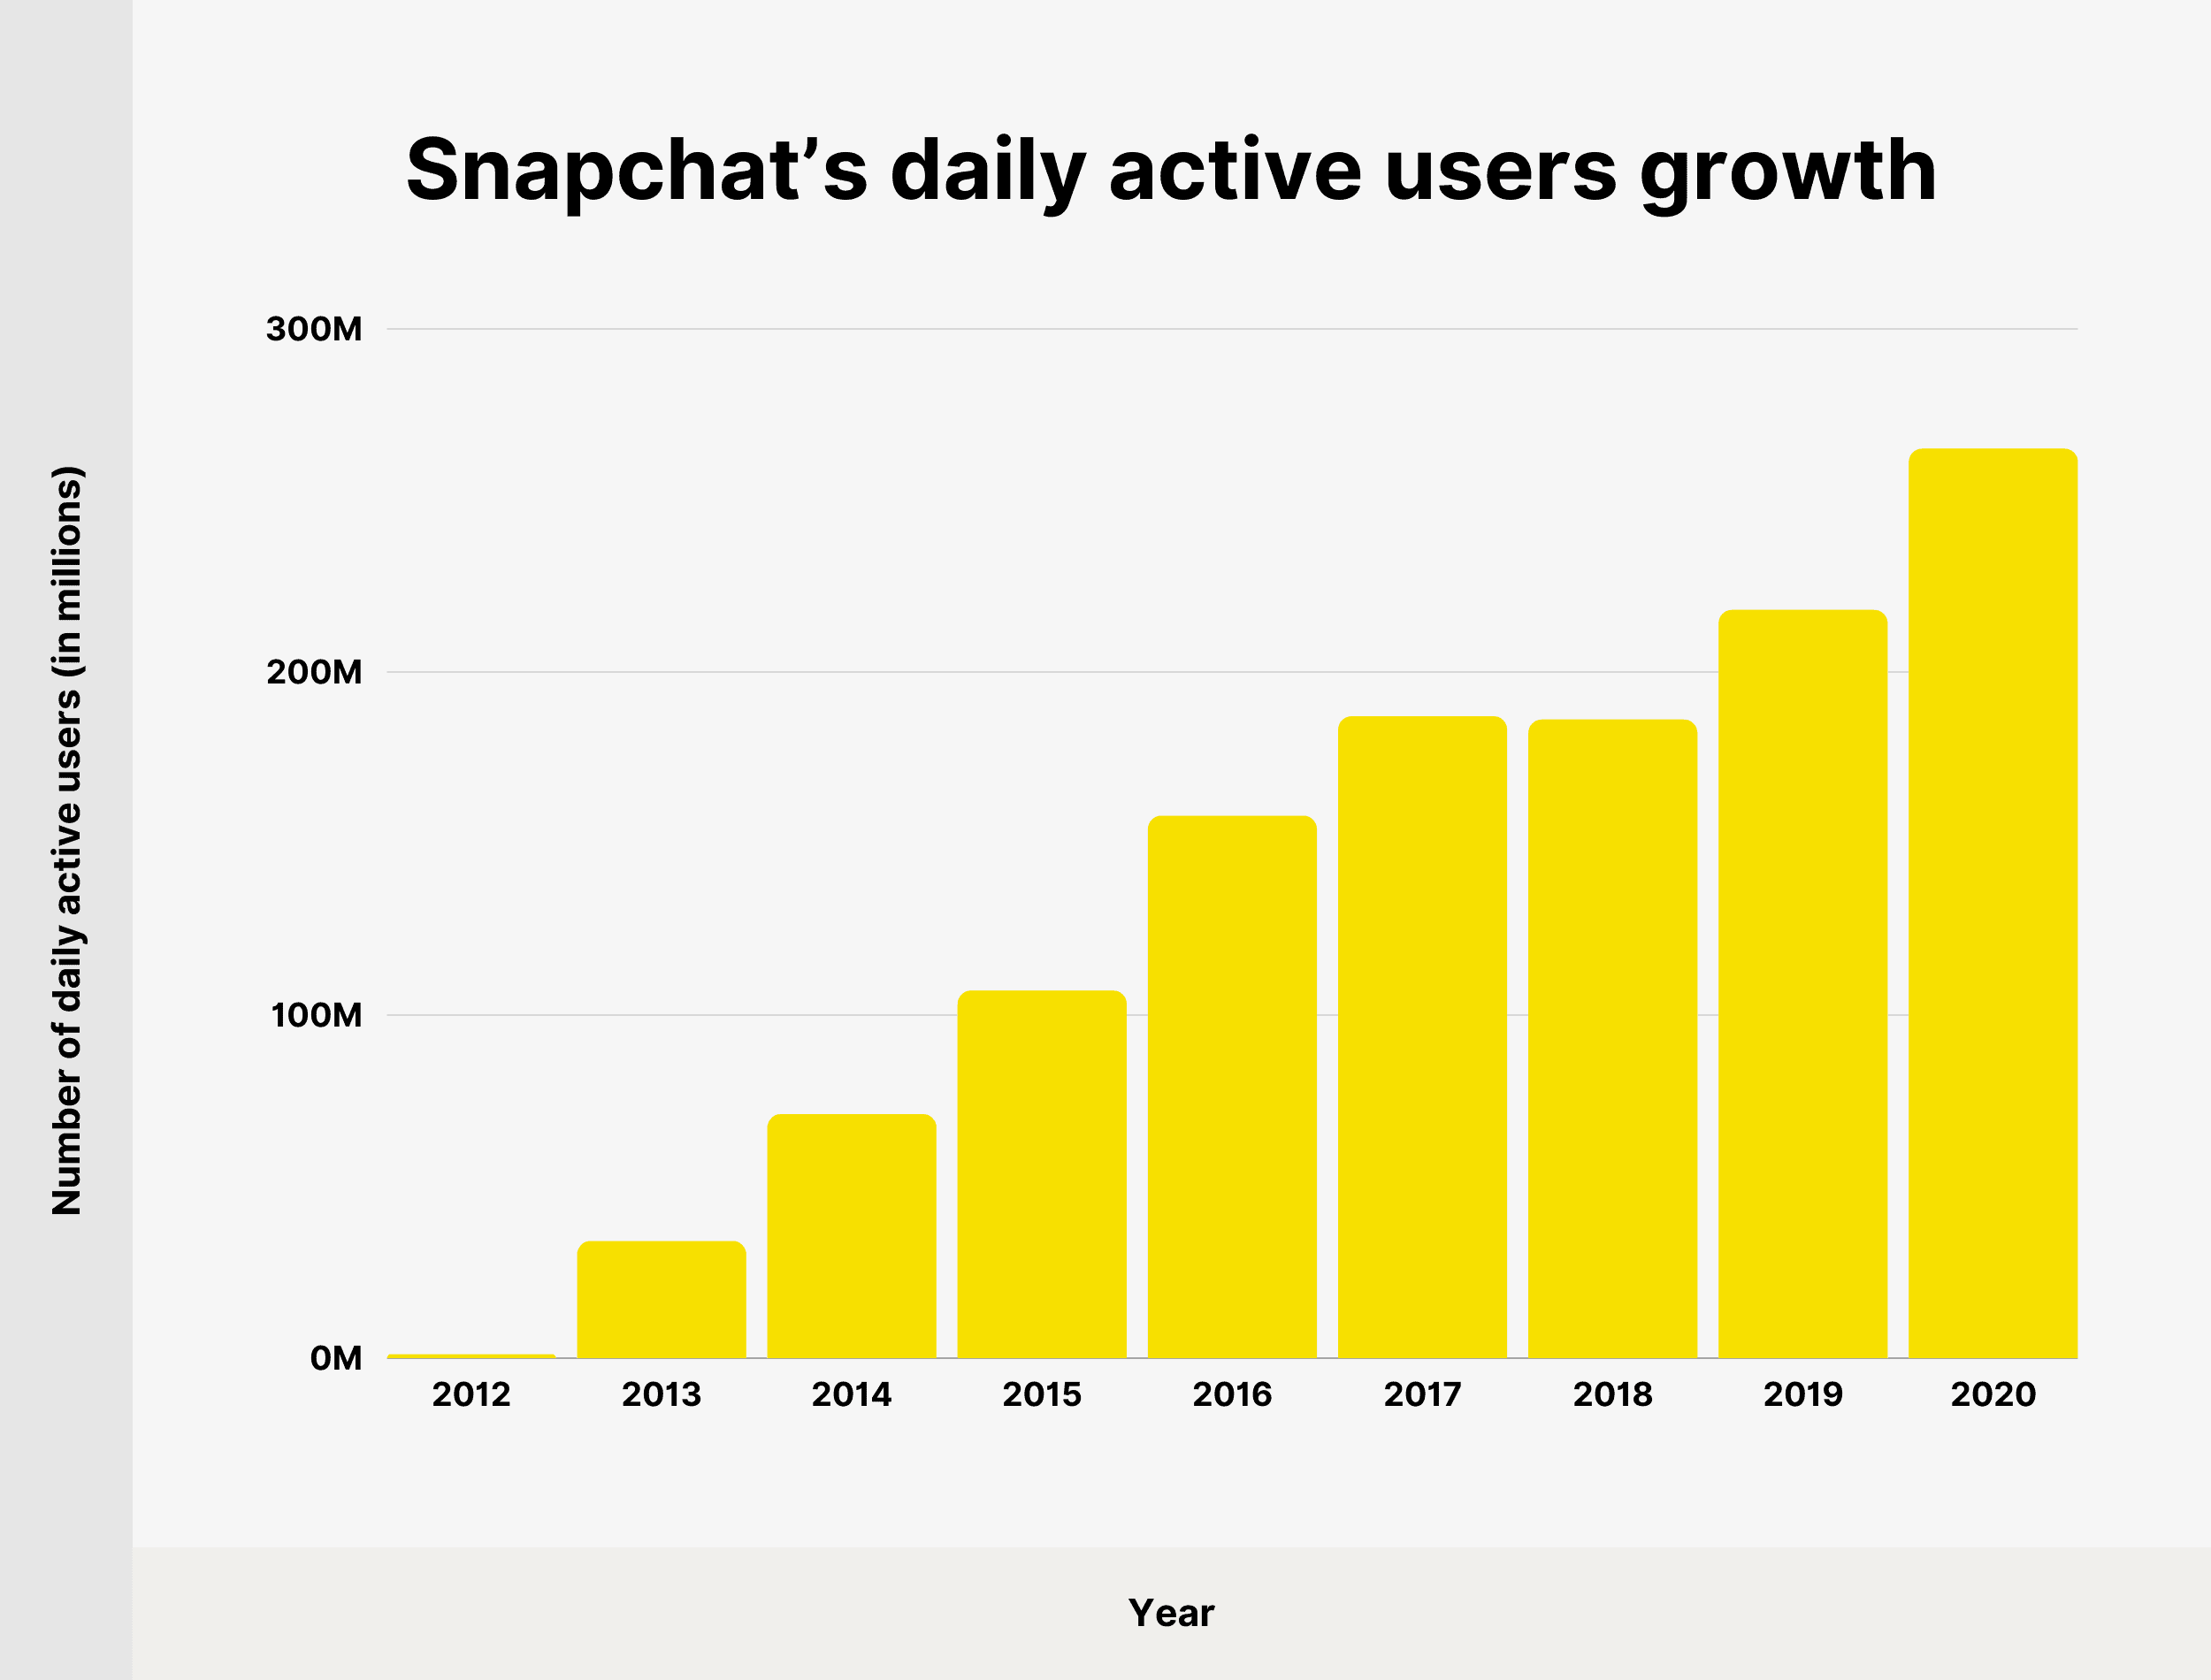 Snapchat’s daily active users growth